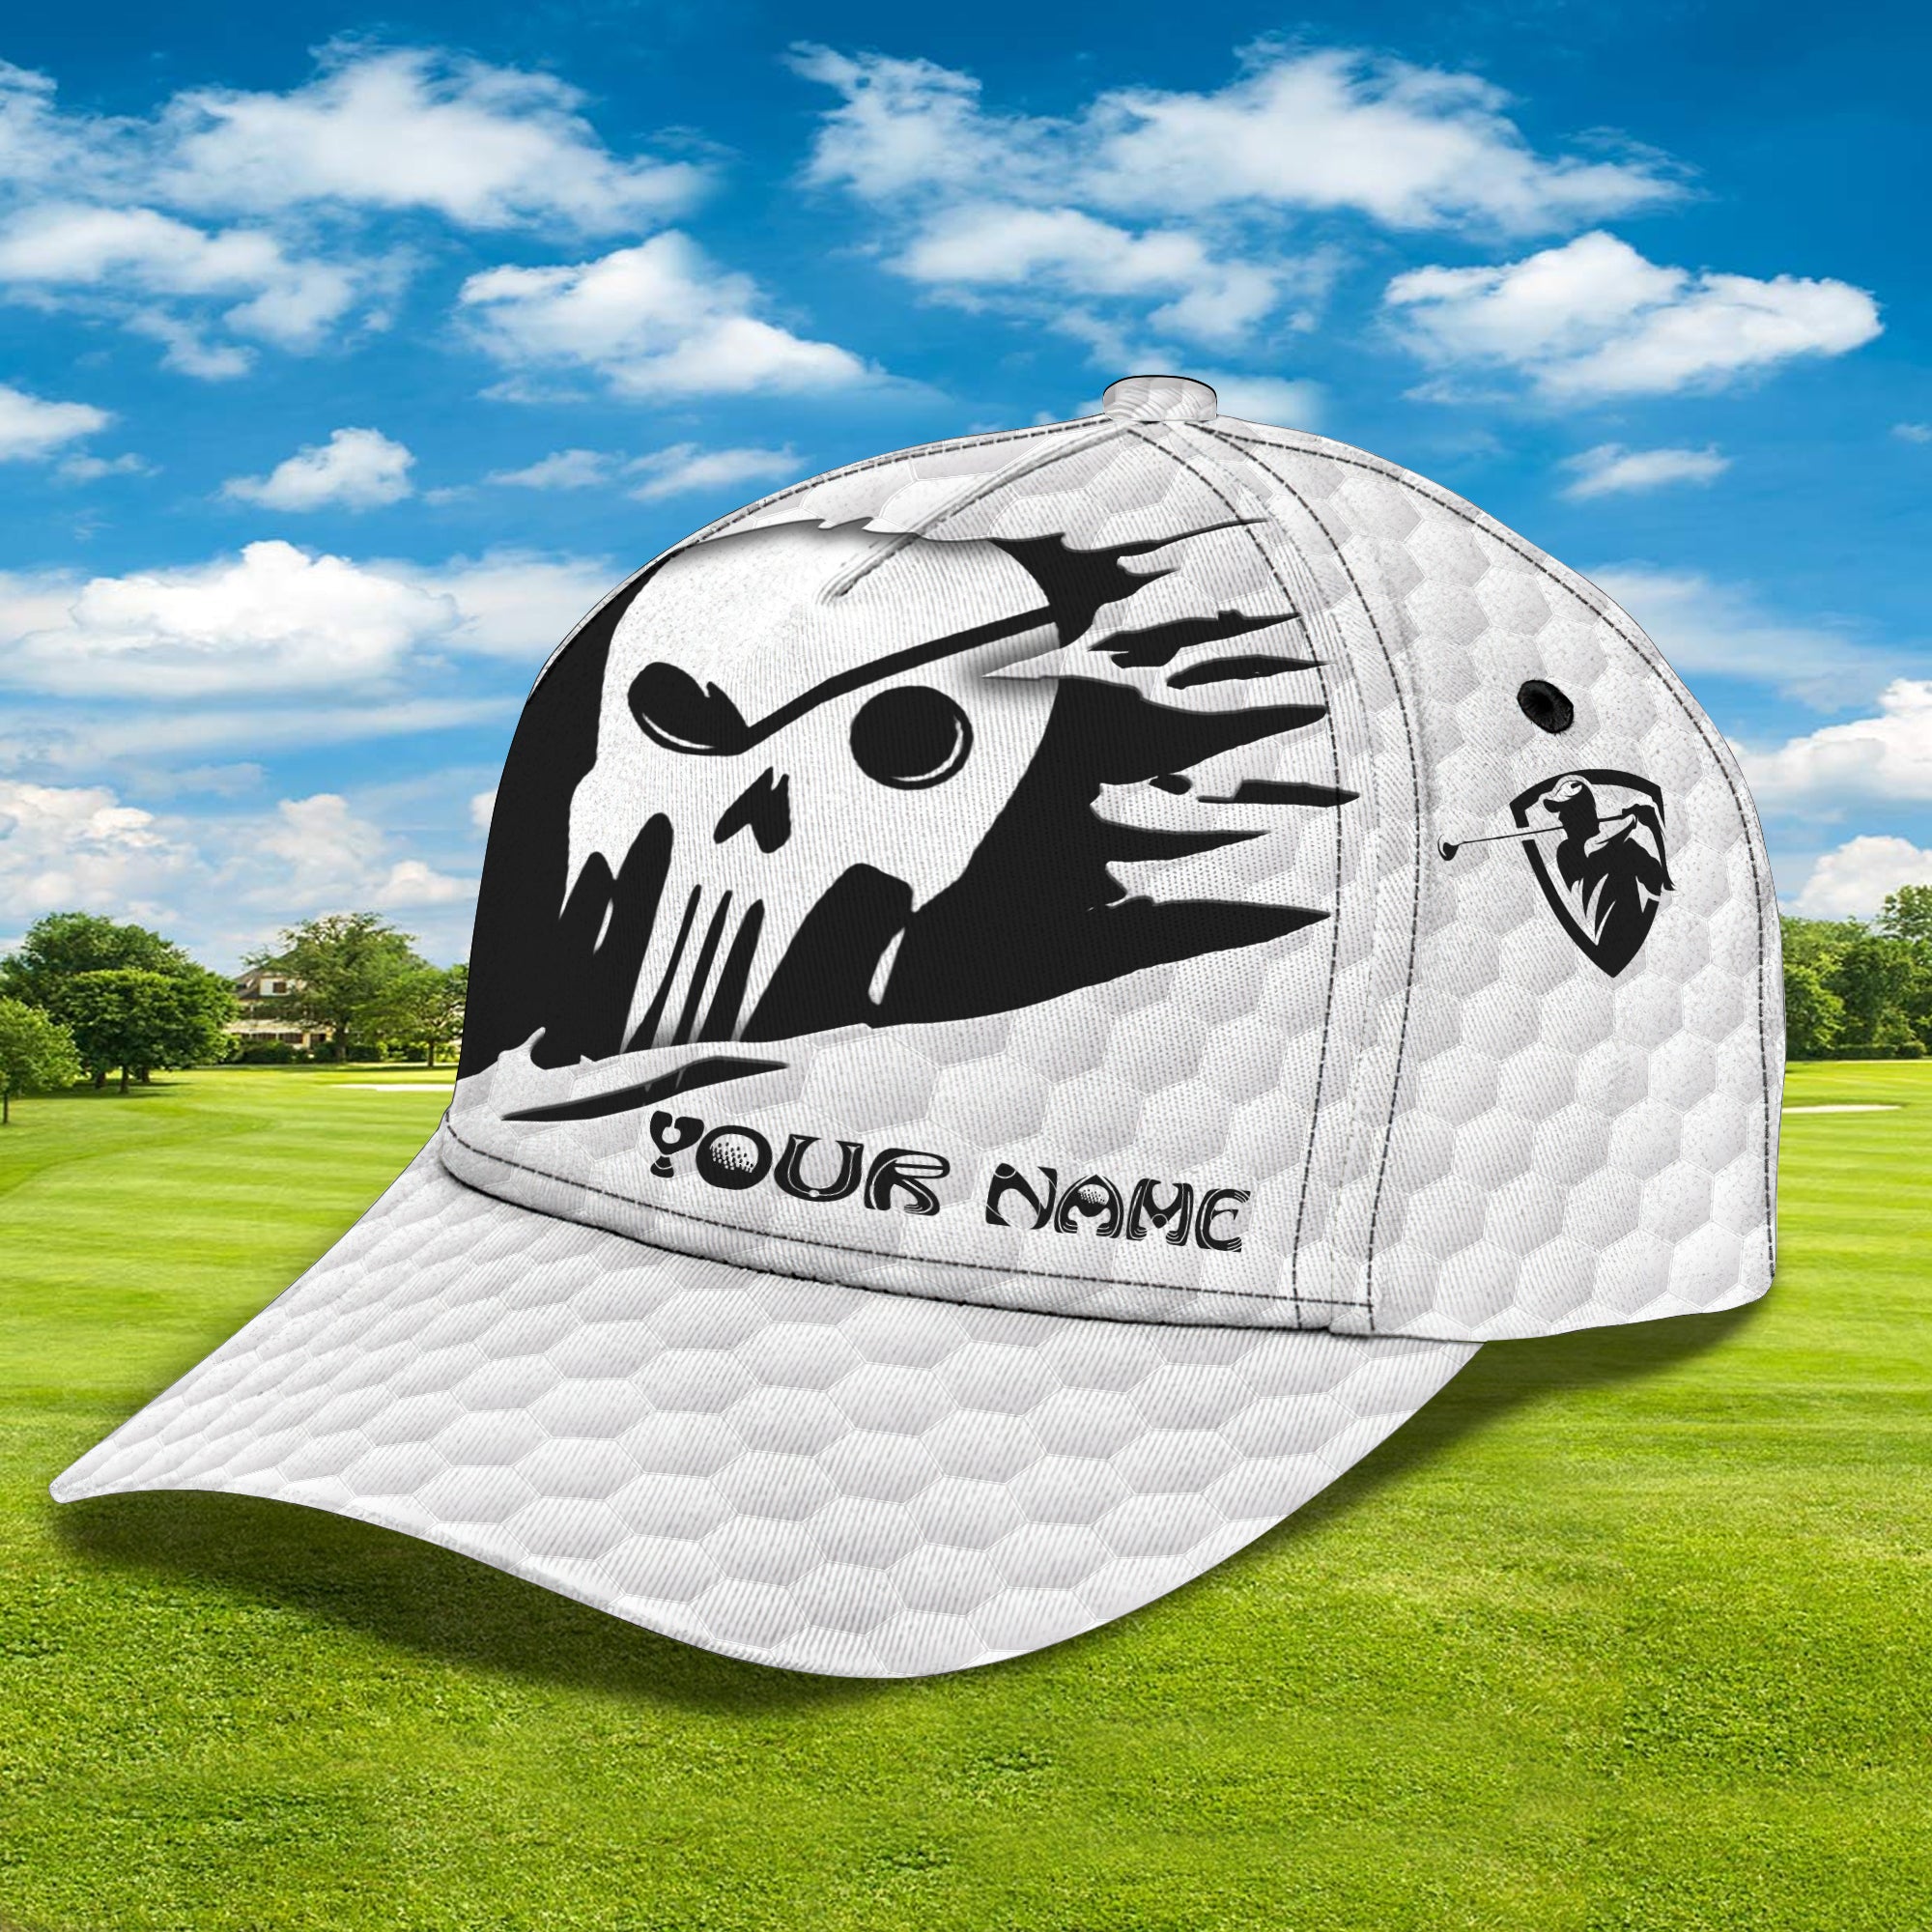 Golf - Personalized Name Cap - DAT93-014